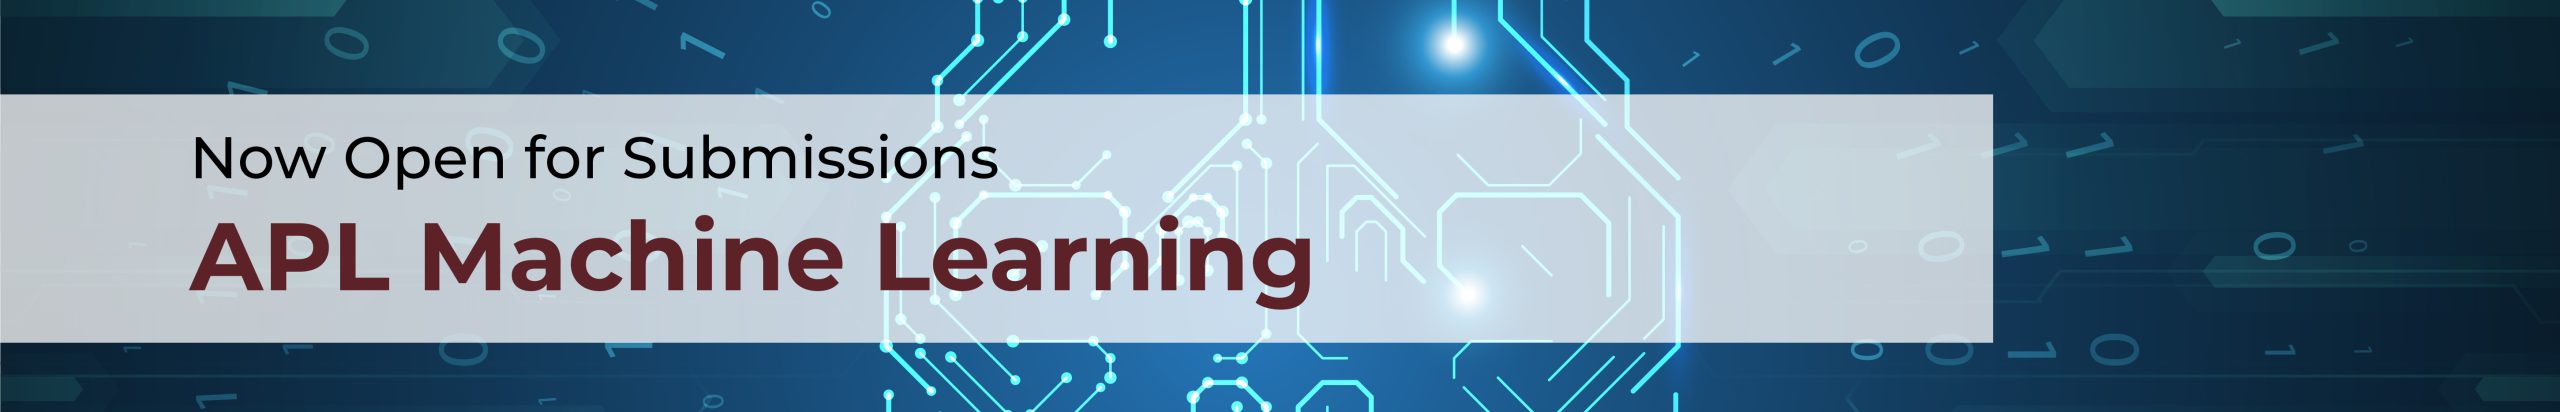 Coming Soon in 2022- APL Machine Learning